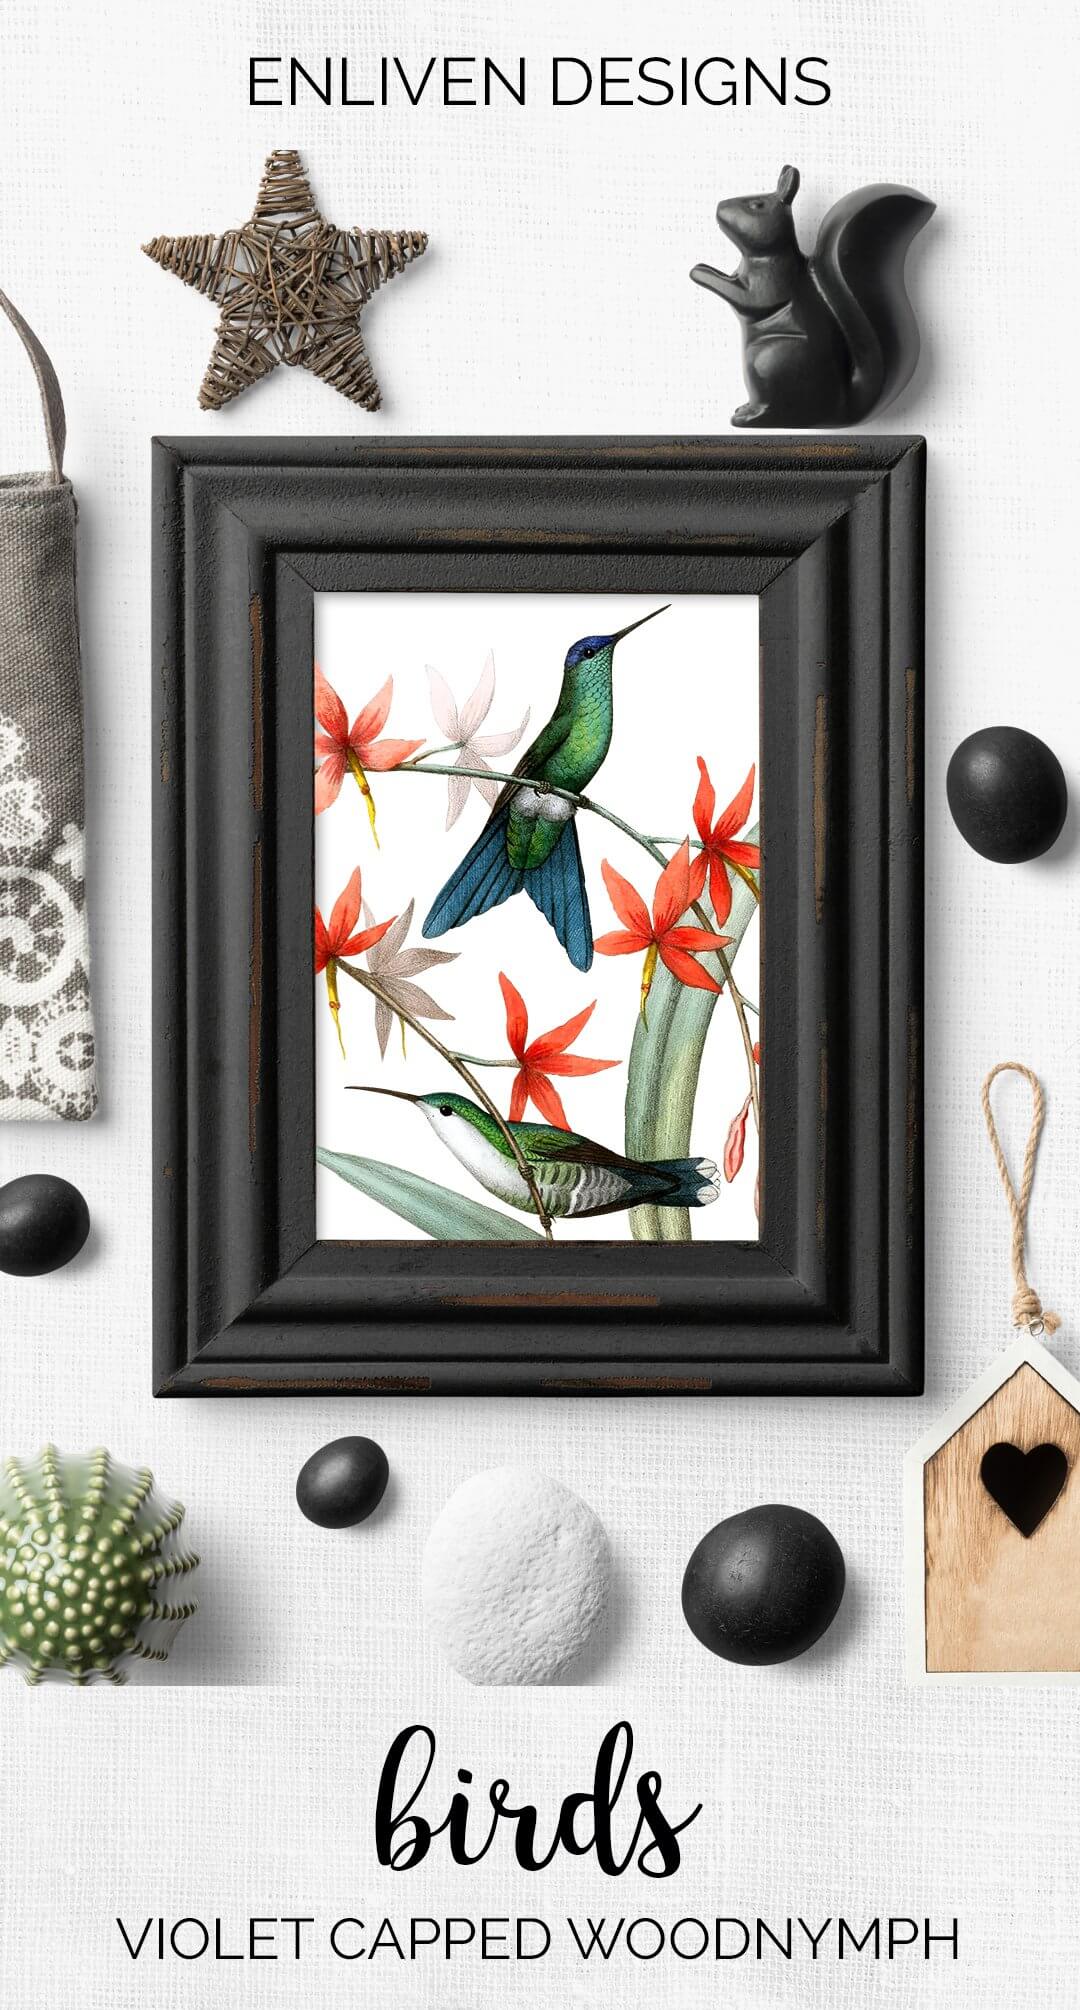 In the black frame is a picture with small hummingbirds.